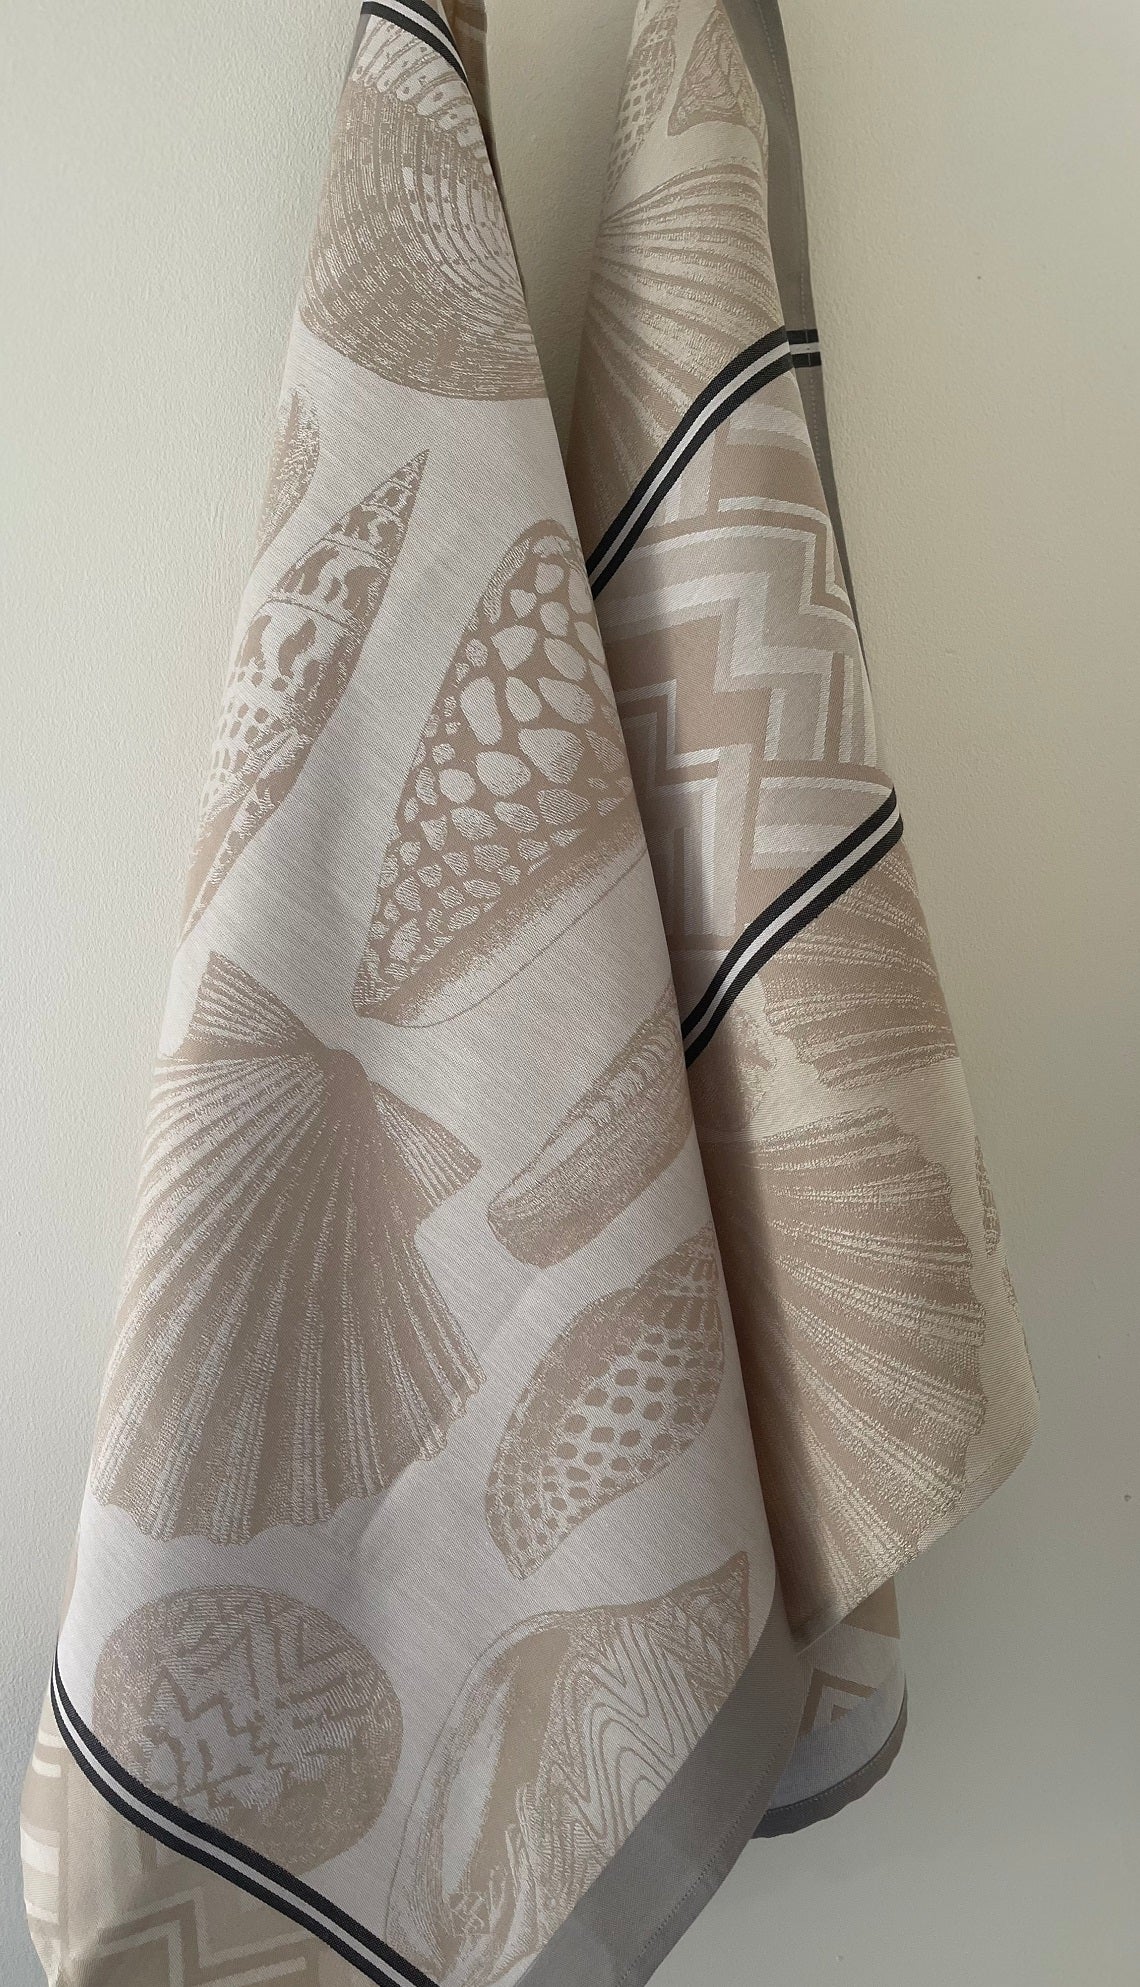 Jacquard Francais "Coquillages" (Sable), Woven cotton tea towel. Made in France.